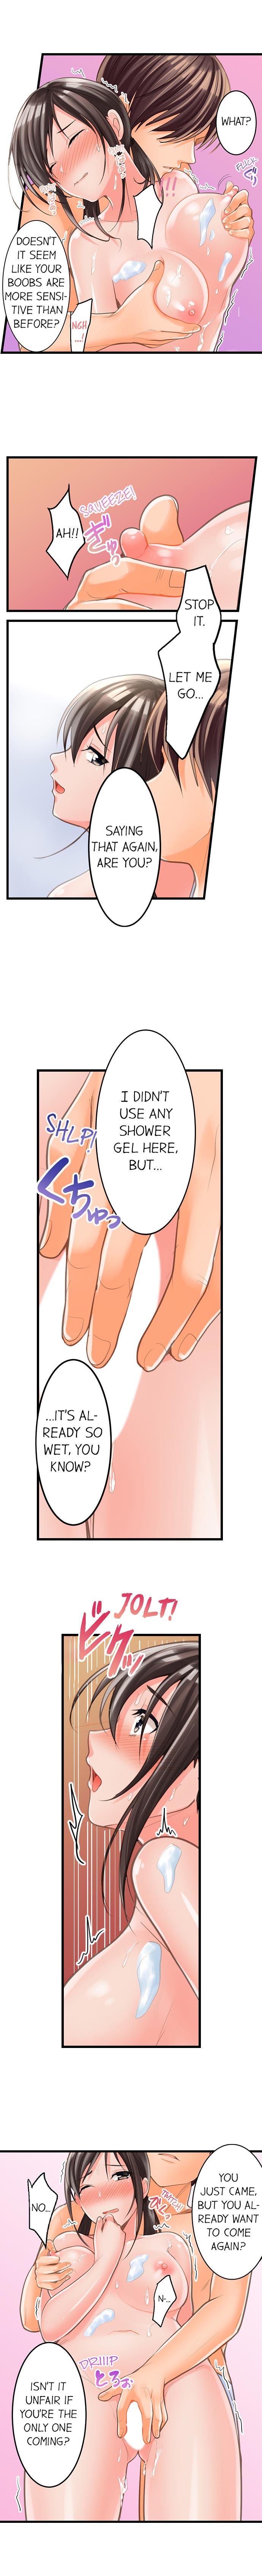 The Day She Became a Sex Toy (Complete] 42